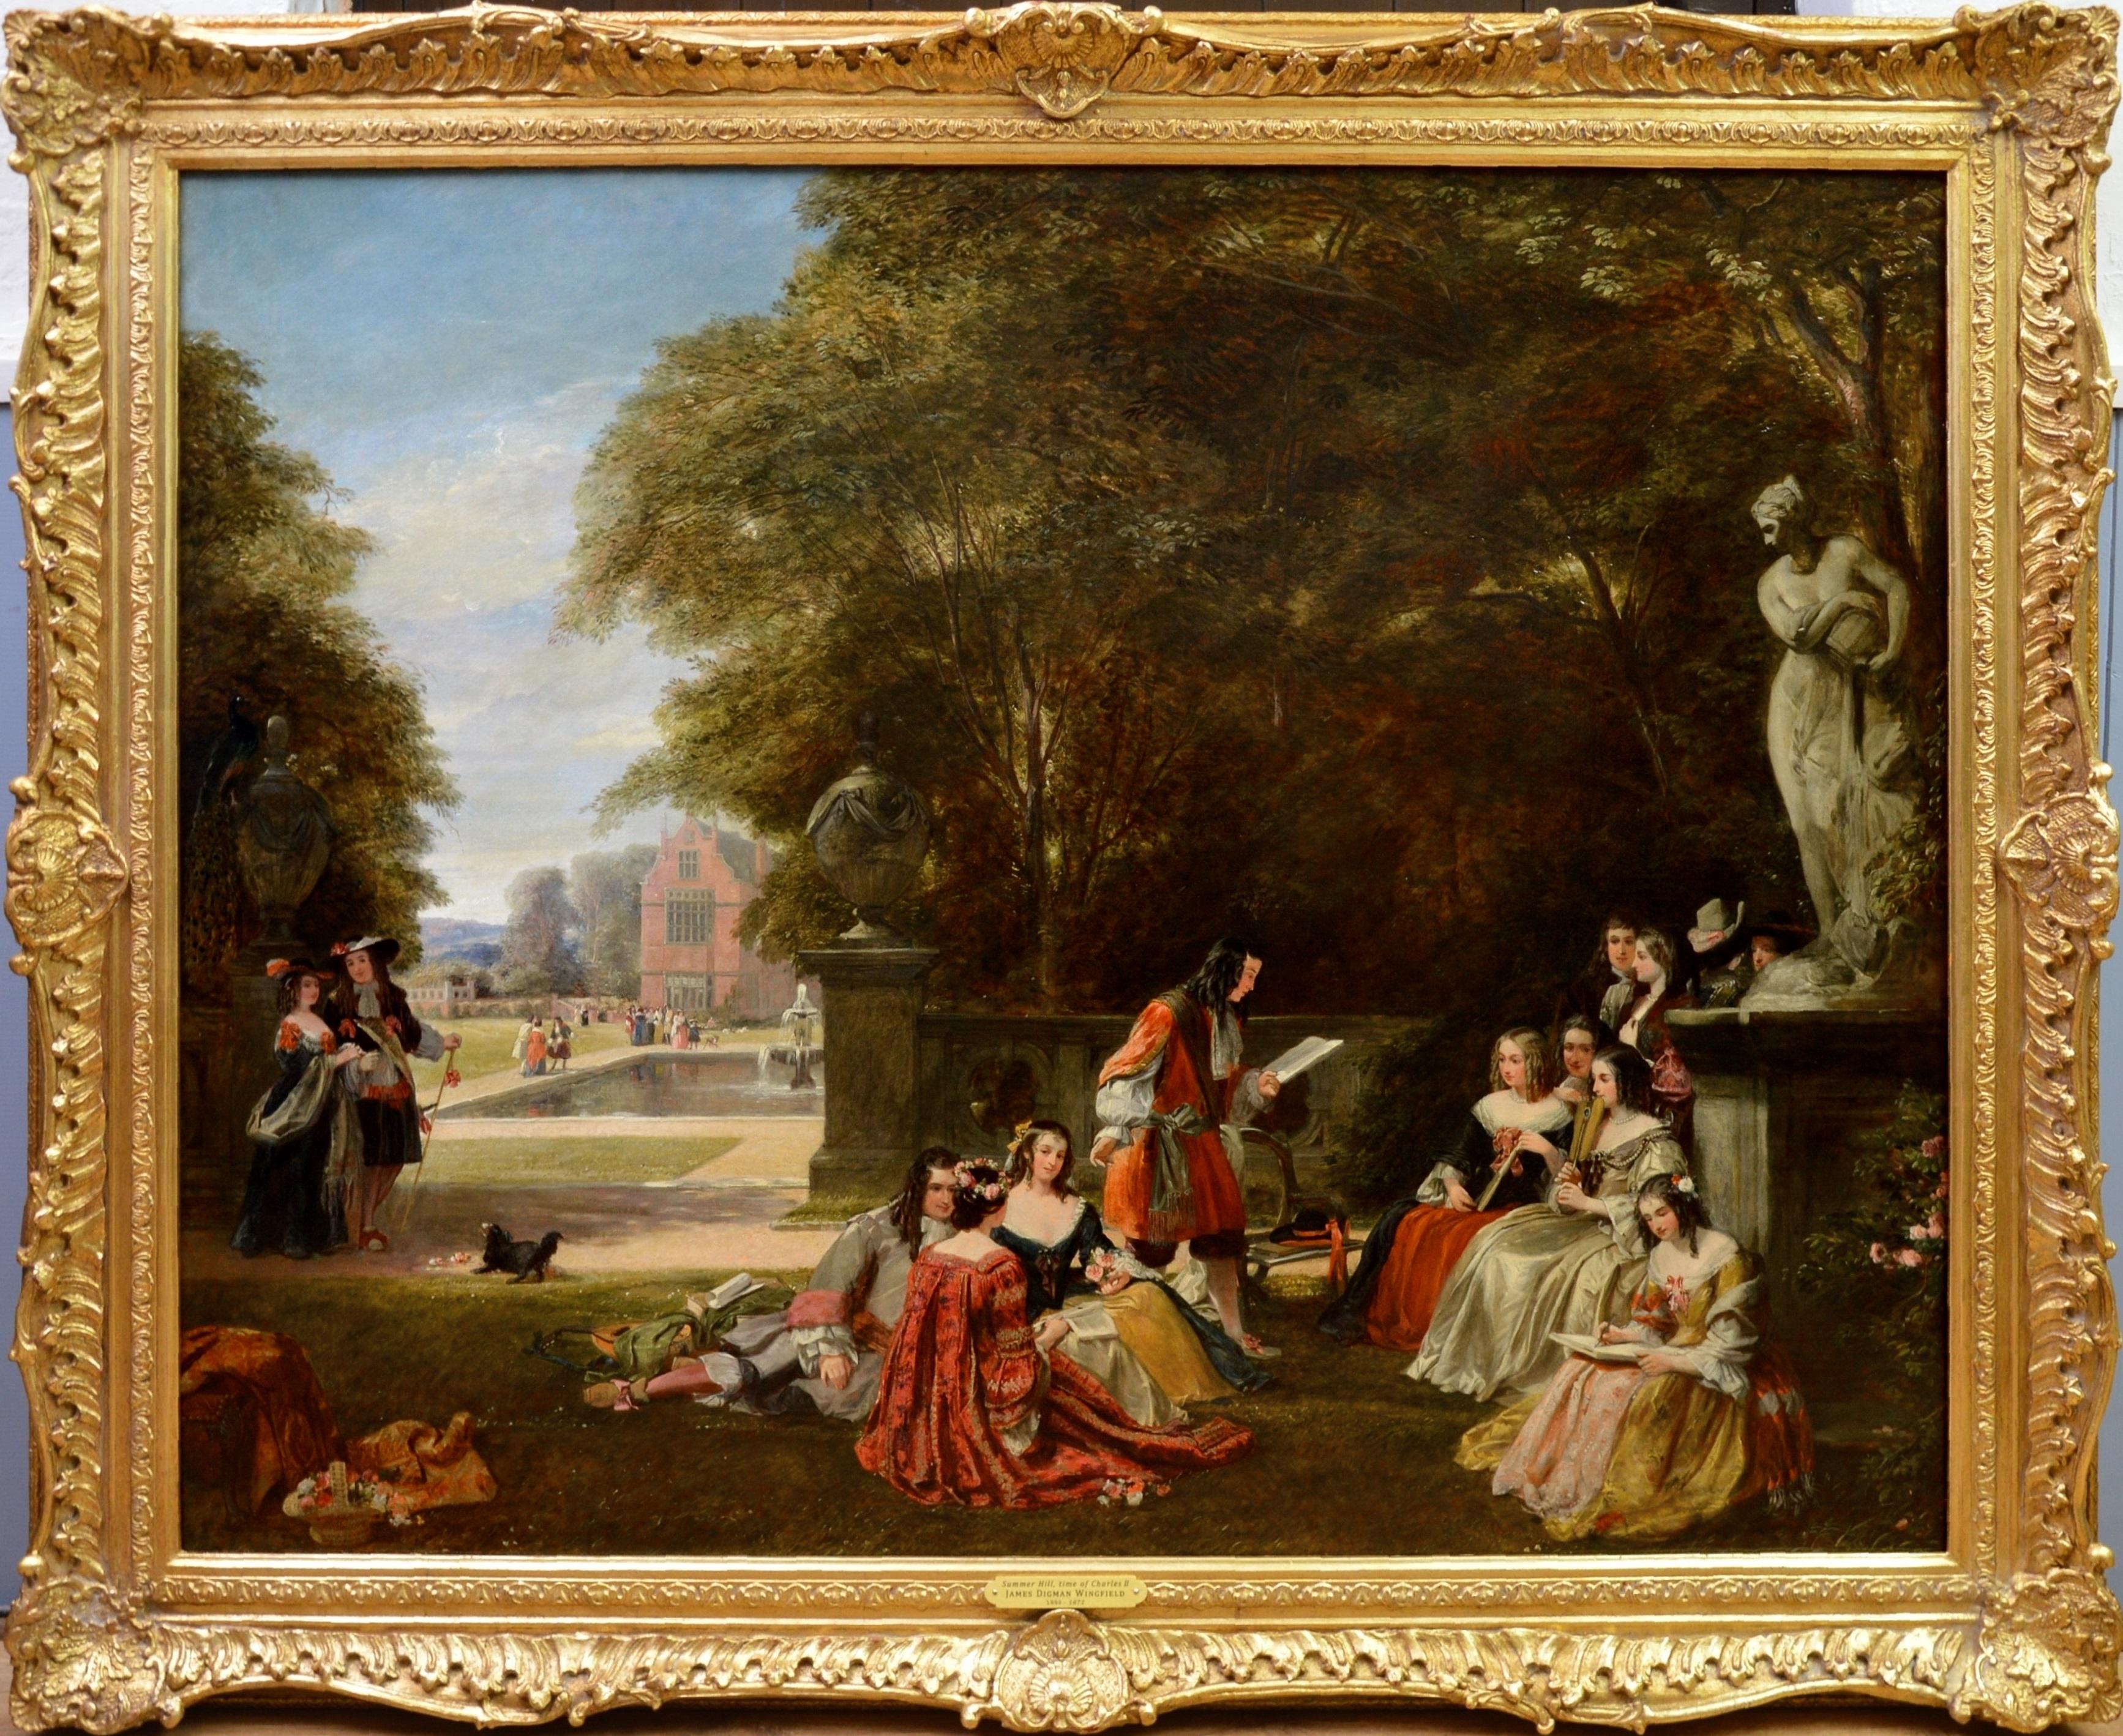 James Digman Wingfield  Figurative Painting - Summer Hill - V Large 19th Century Royal Academy Oil Painting of King Charles II